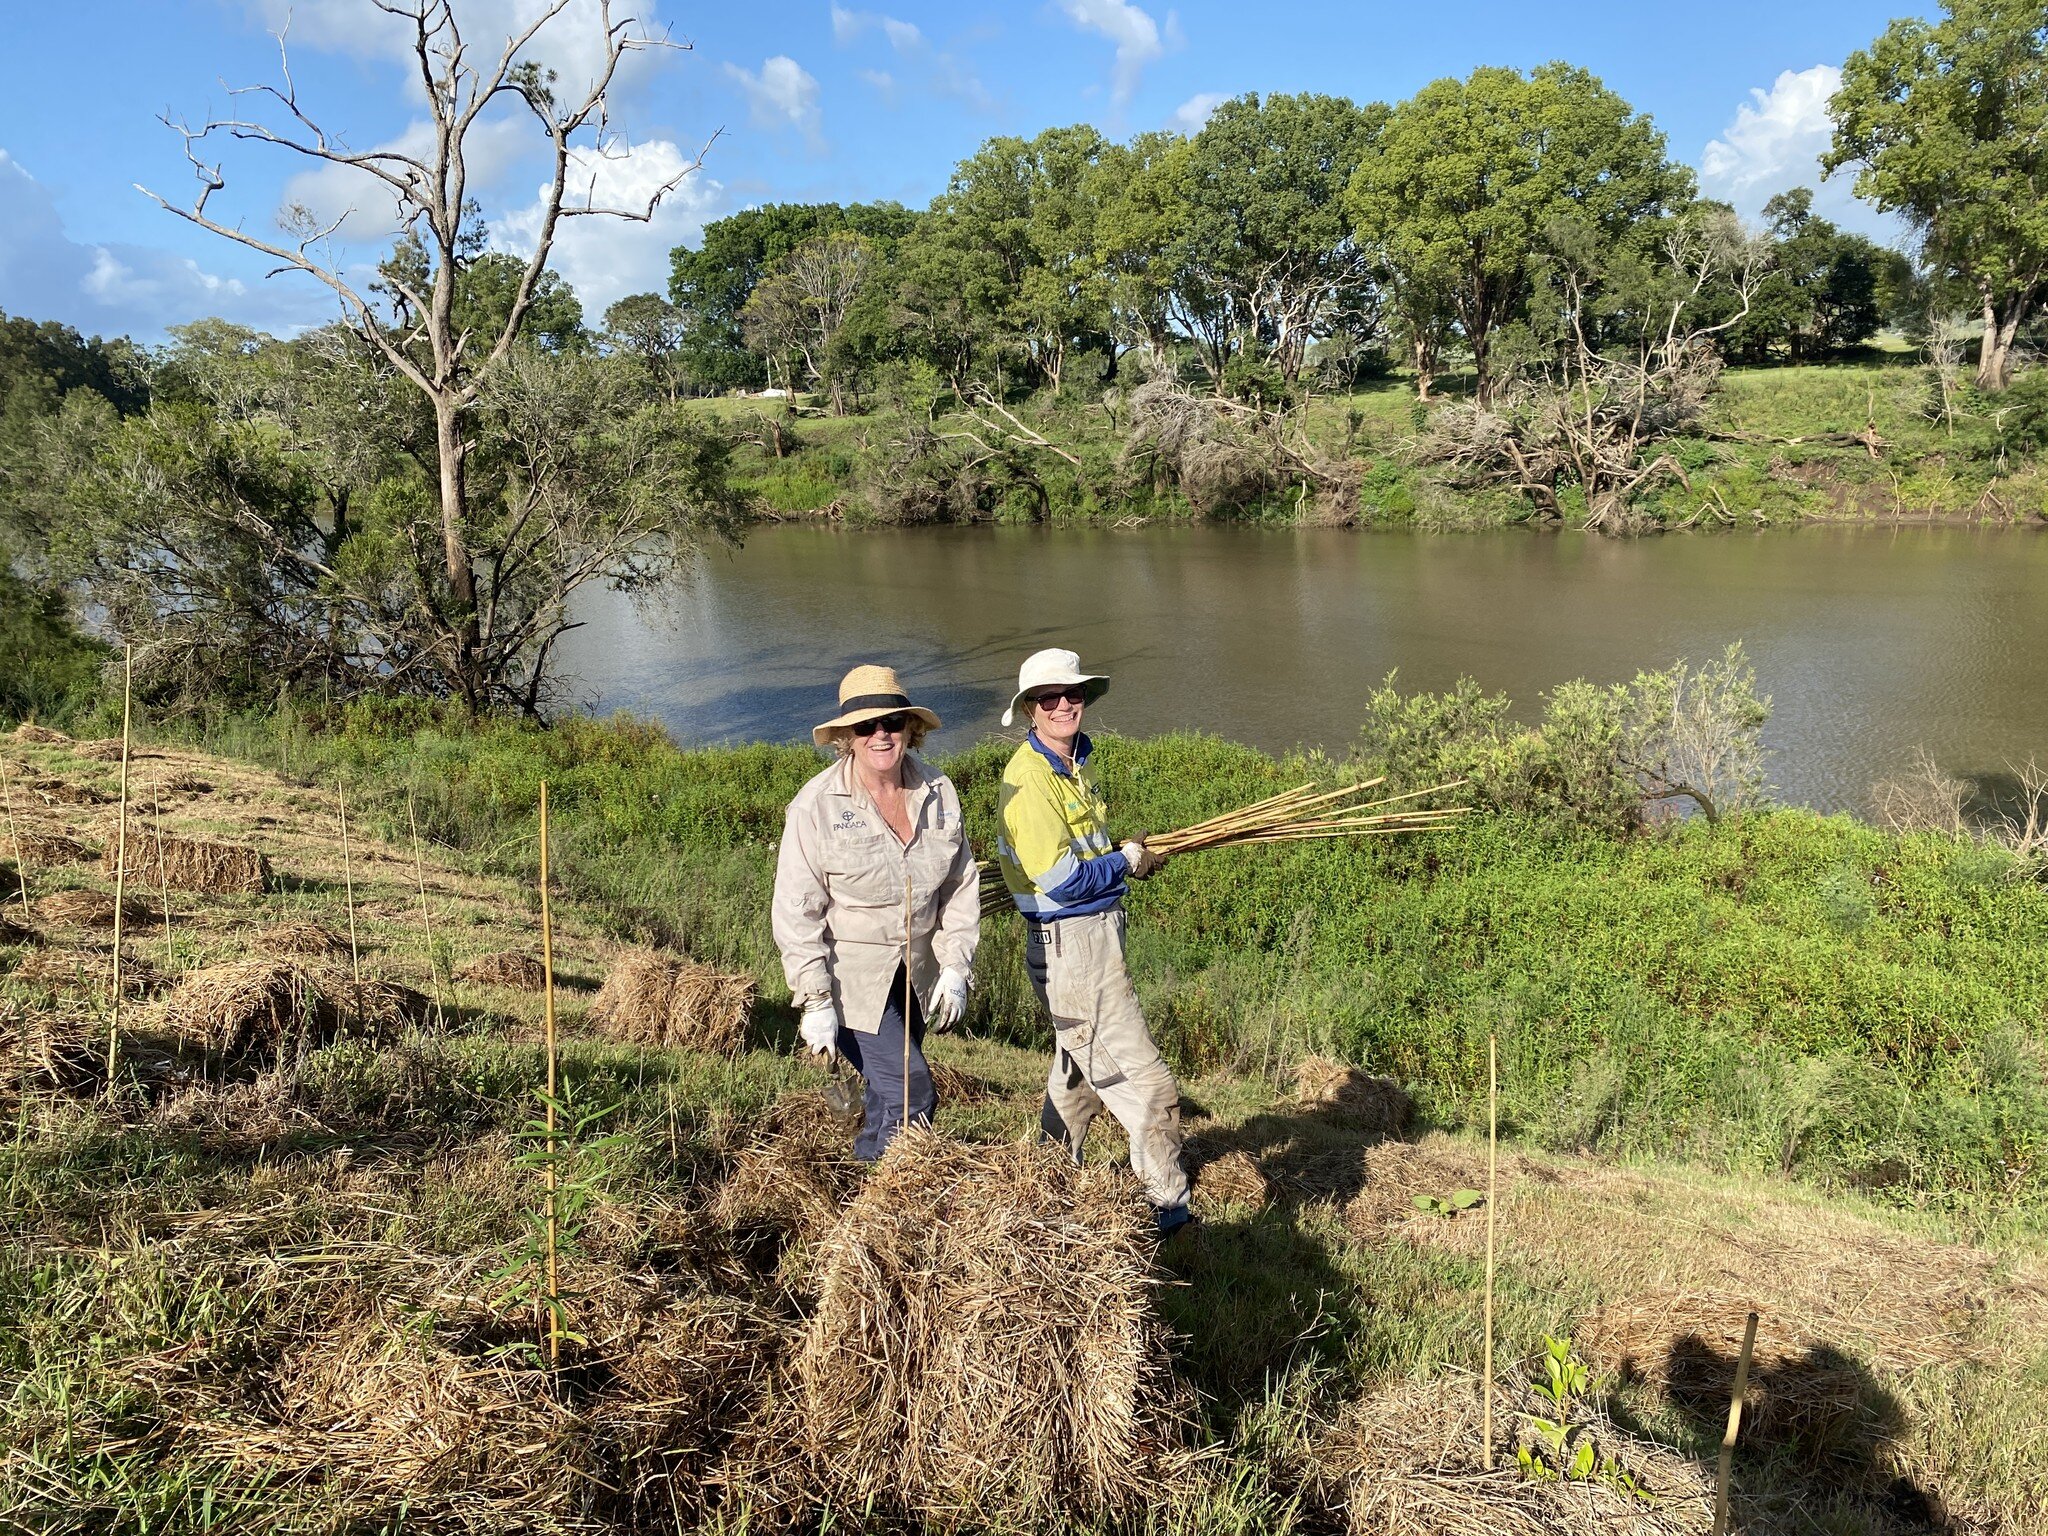 Riverbank Planting, Wyrallah

Join Monaltrie Landcare and Conservation Volunteers for a planting - 5th May 2023 at 9am.

During the 2022 flooding disaster across the Northern Rivers all creek lines and riverbanks were altered in some way and had a la